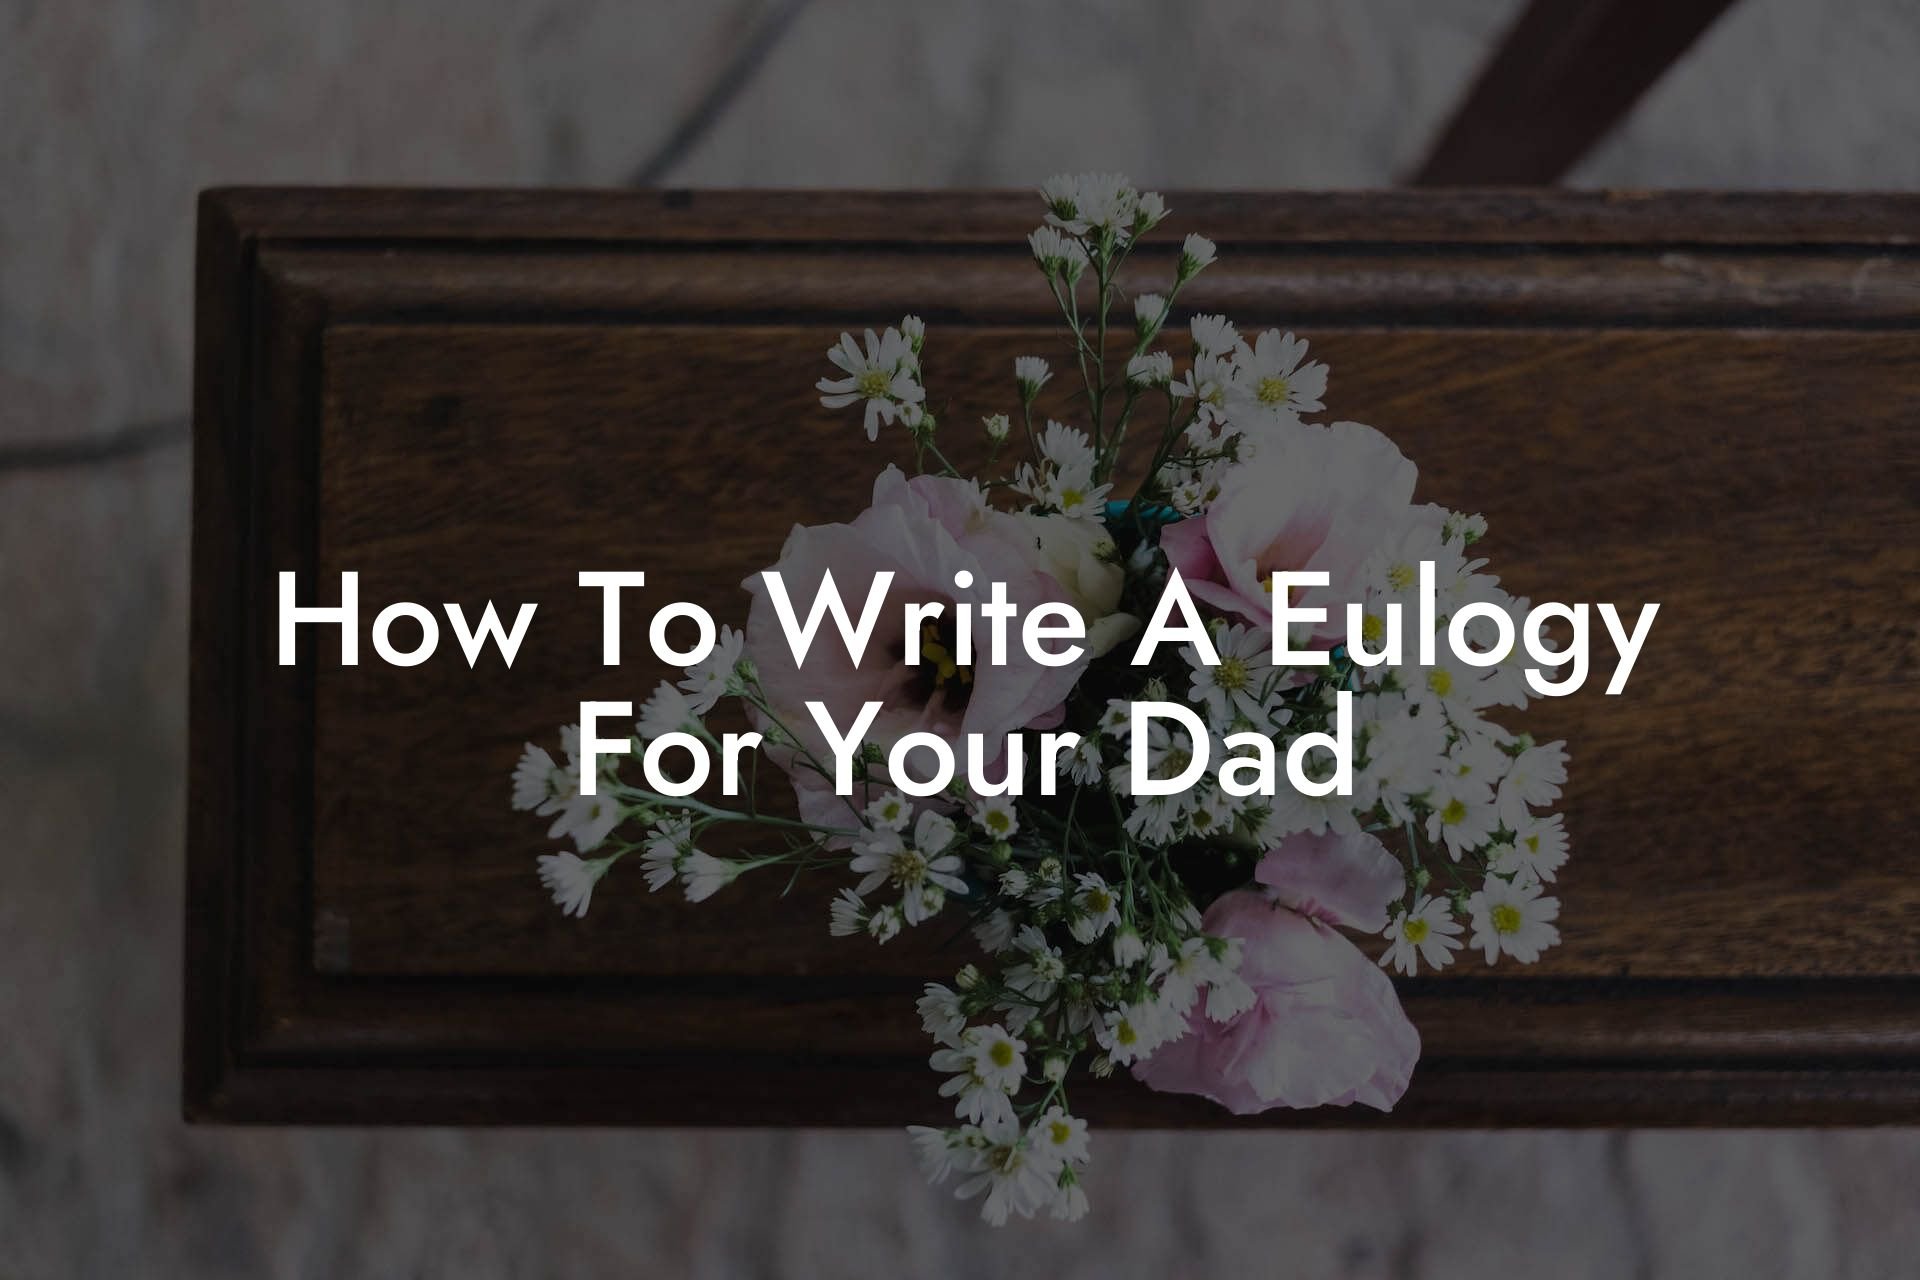 How To Write A Eulogy For Your Dad